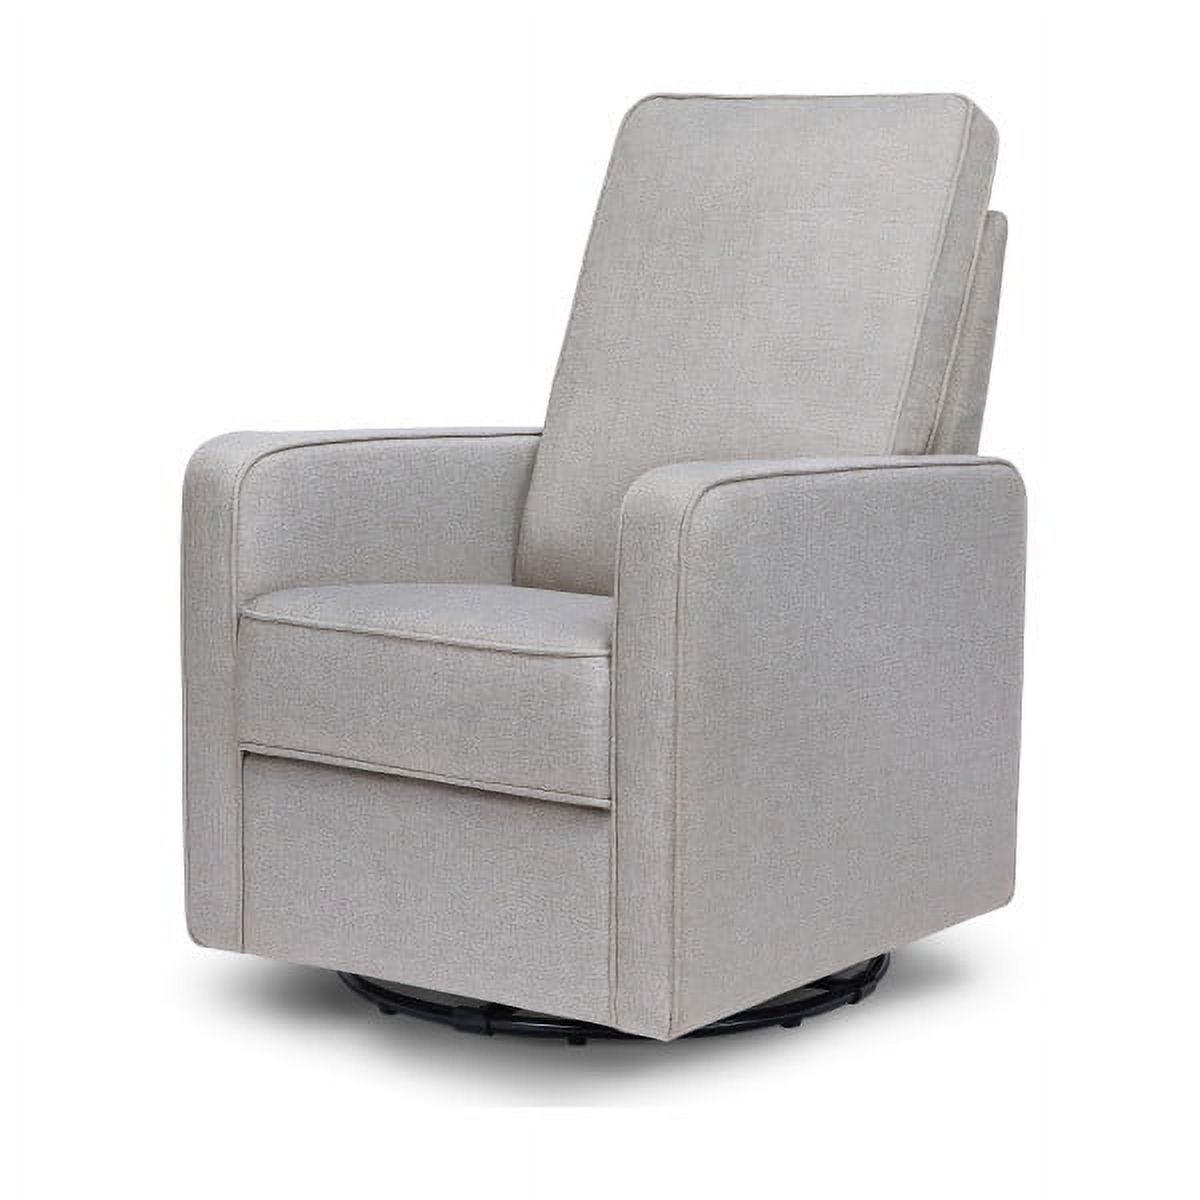 DaVinci Casey Pillowback Swivel Glider Chair in Misty Gray - image 4 of 7